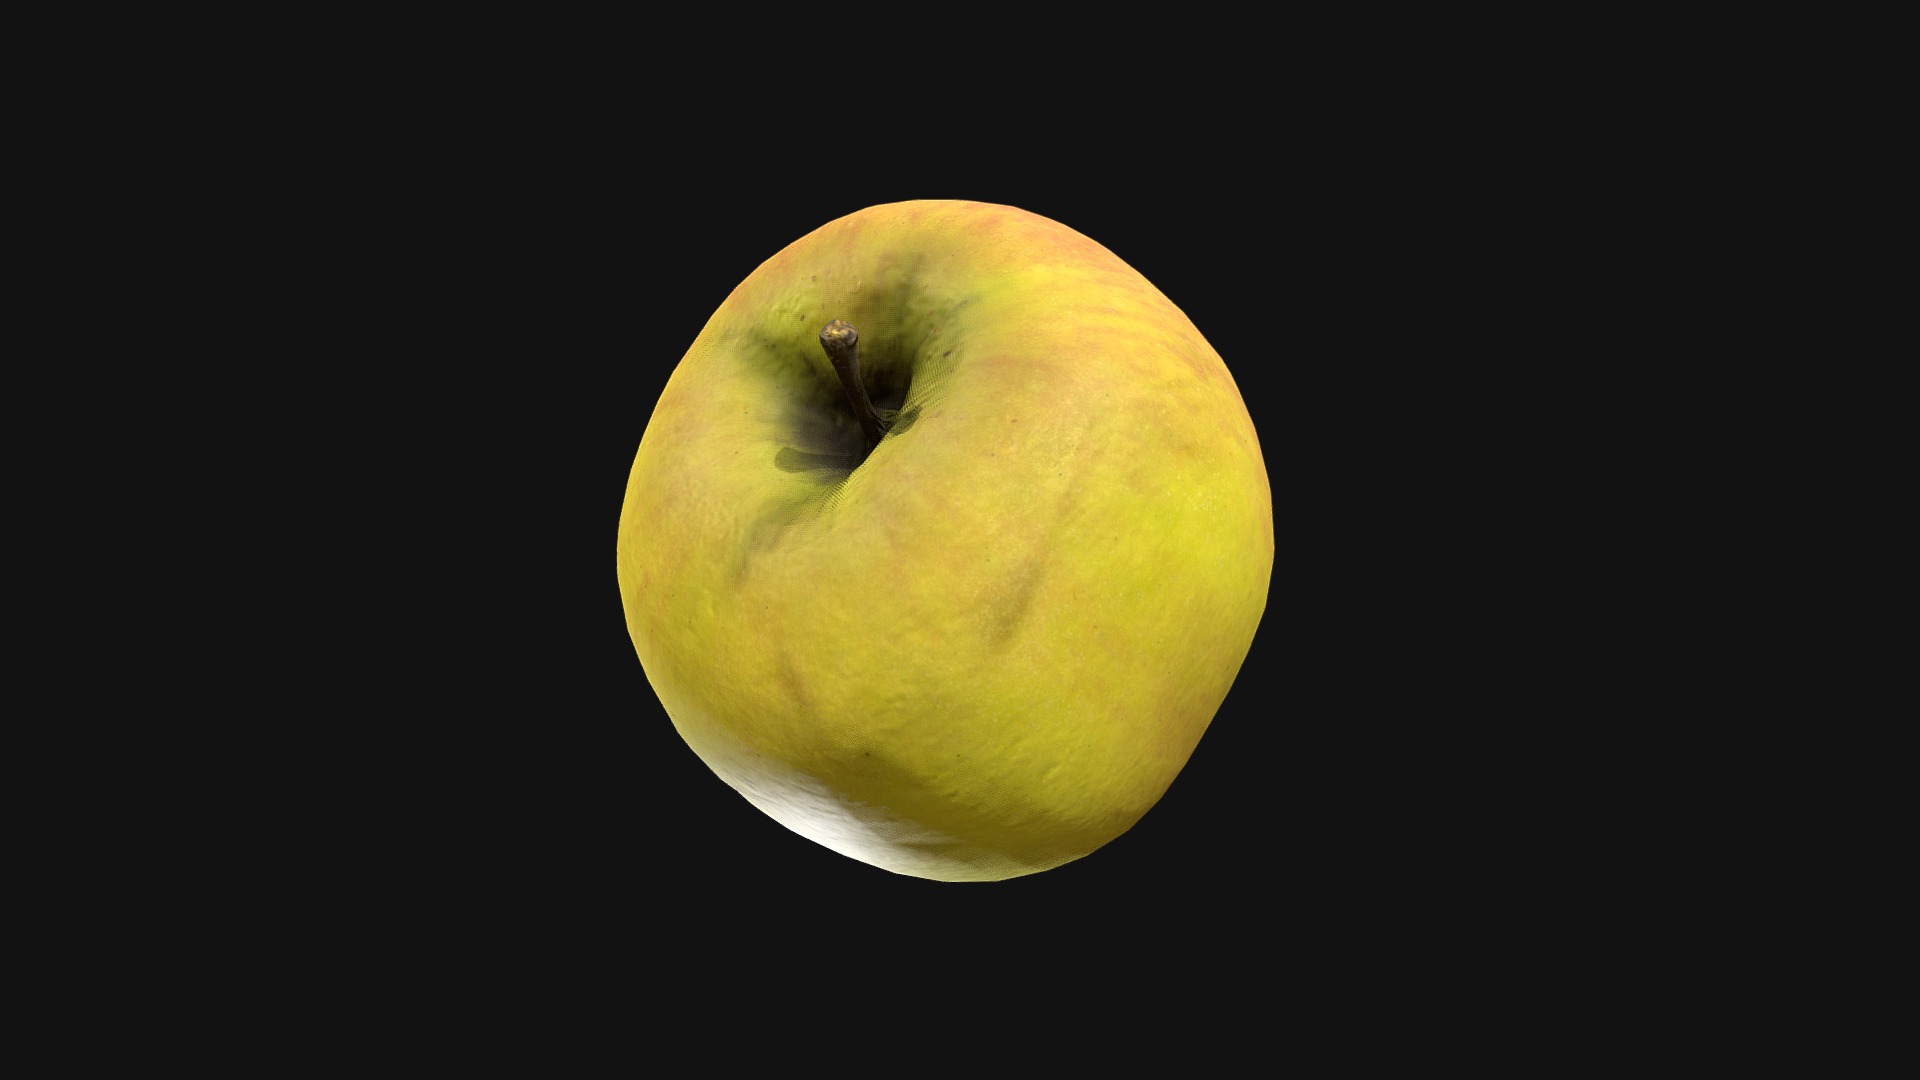 3D model Apple low poly - This is a 3D model of the Apple low poly. The 3D model is about a yellow pear with a black background.